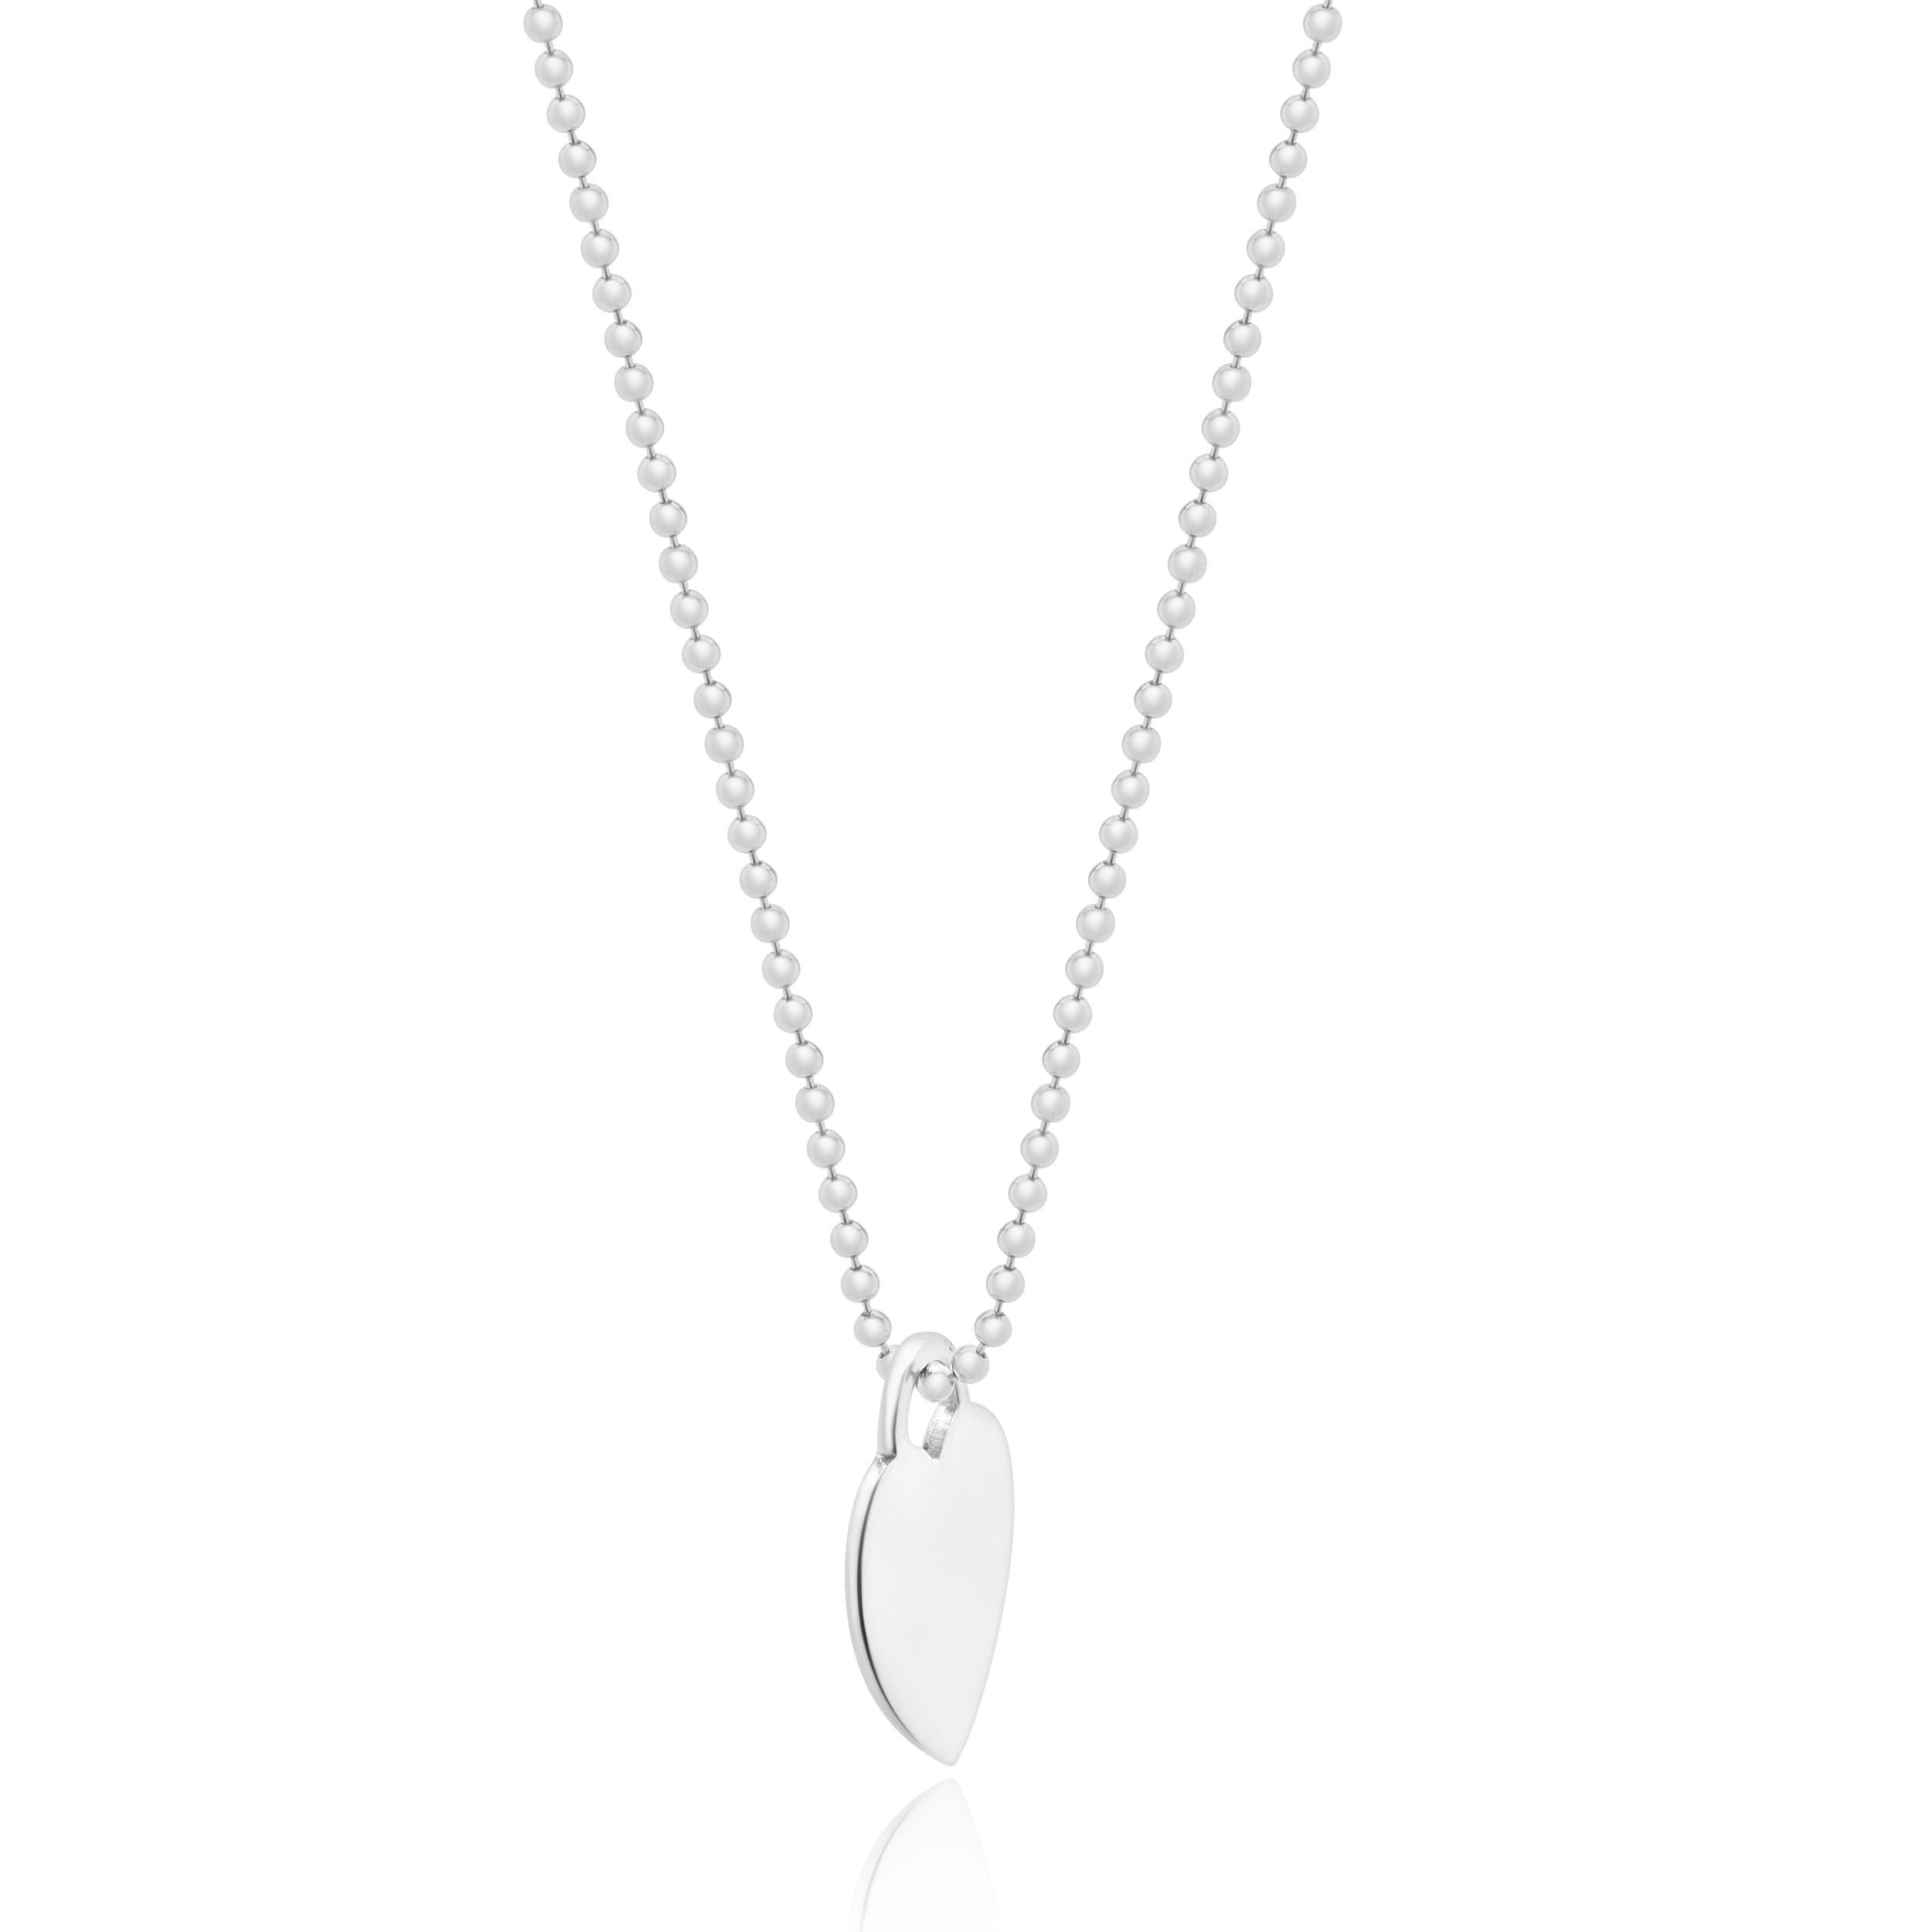 Designer: Tiffany & Co. 
Material: sterling silver
Dimensions: necklace measures 33.75-inches long
Weight: 22.20 grams

No box or papers included